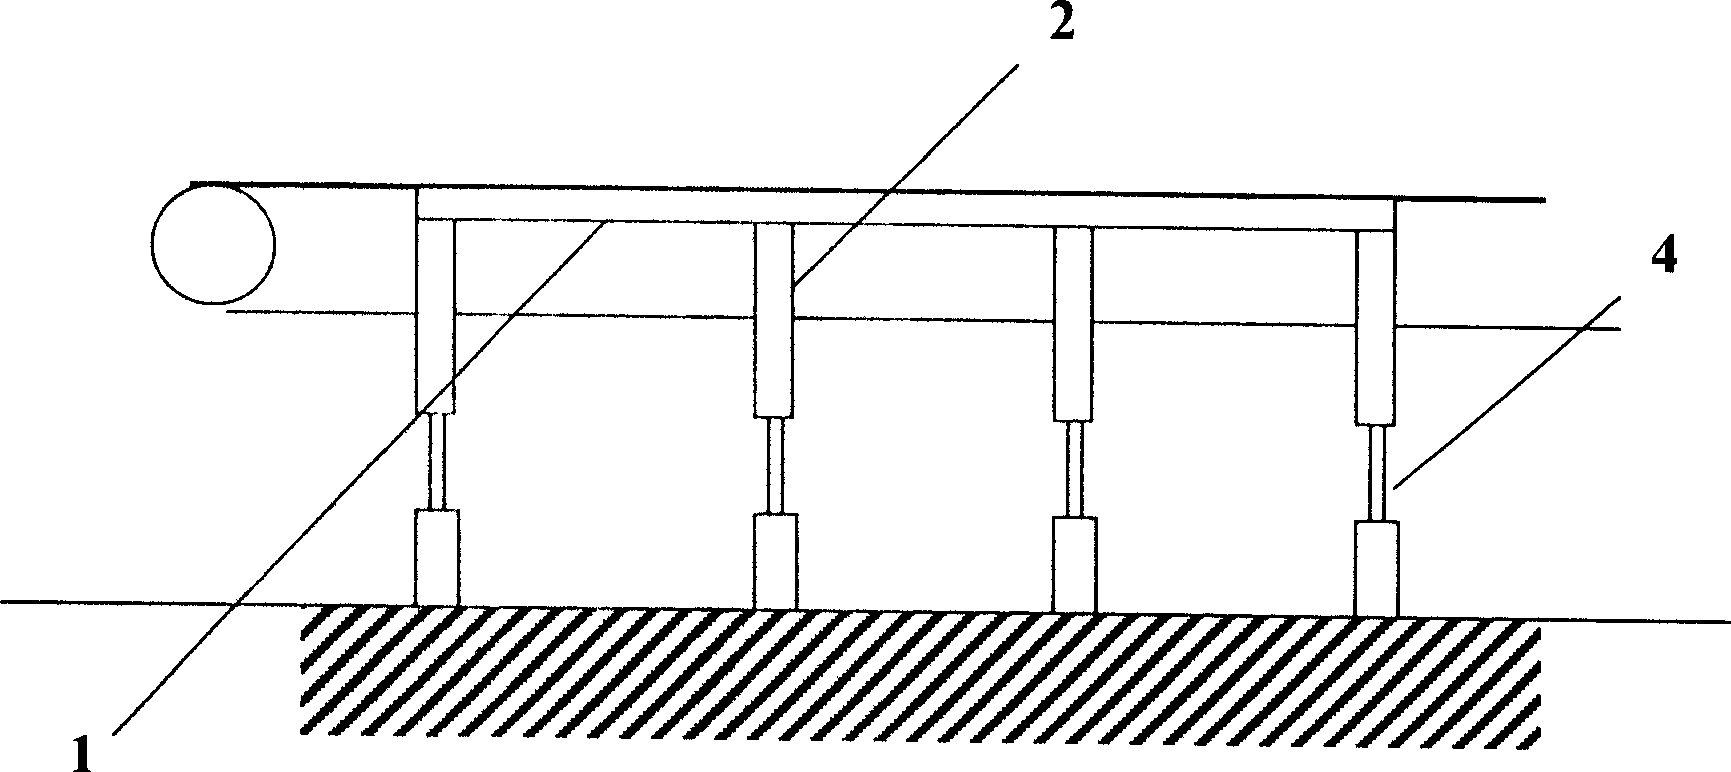 Cushioning and supporting device for conveyer belt